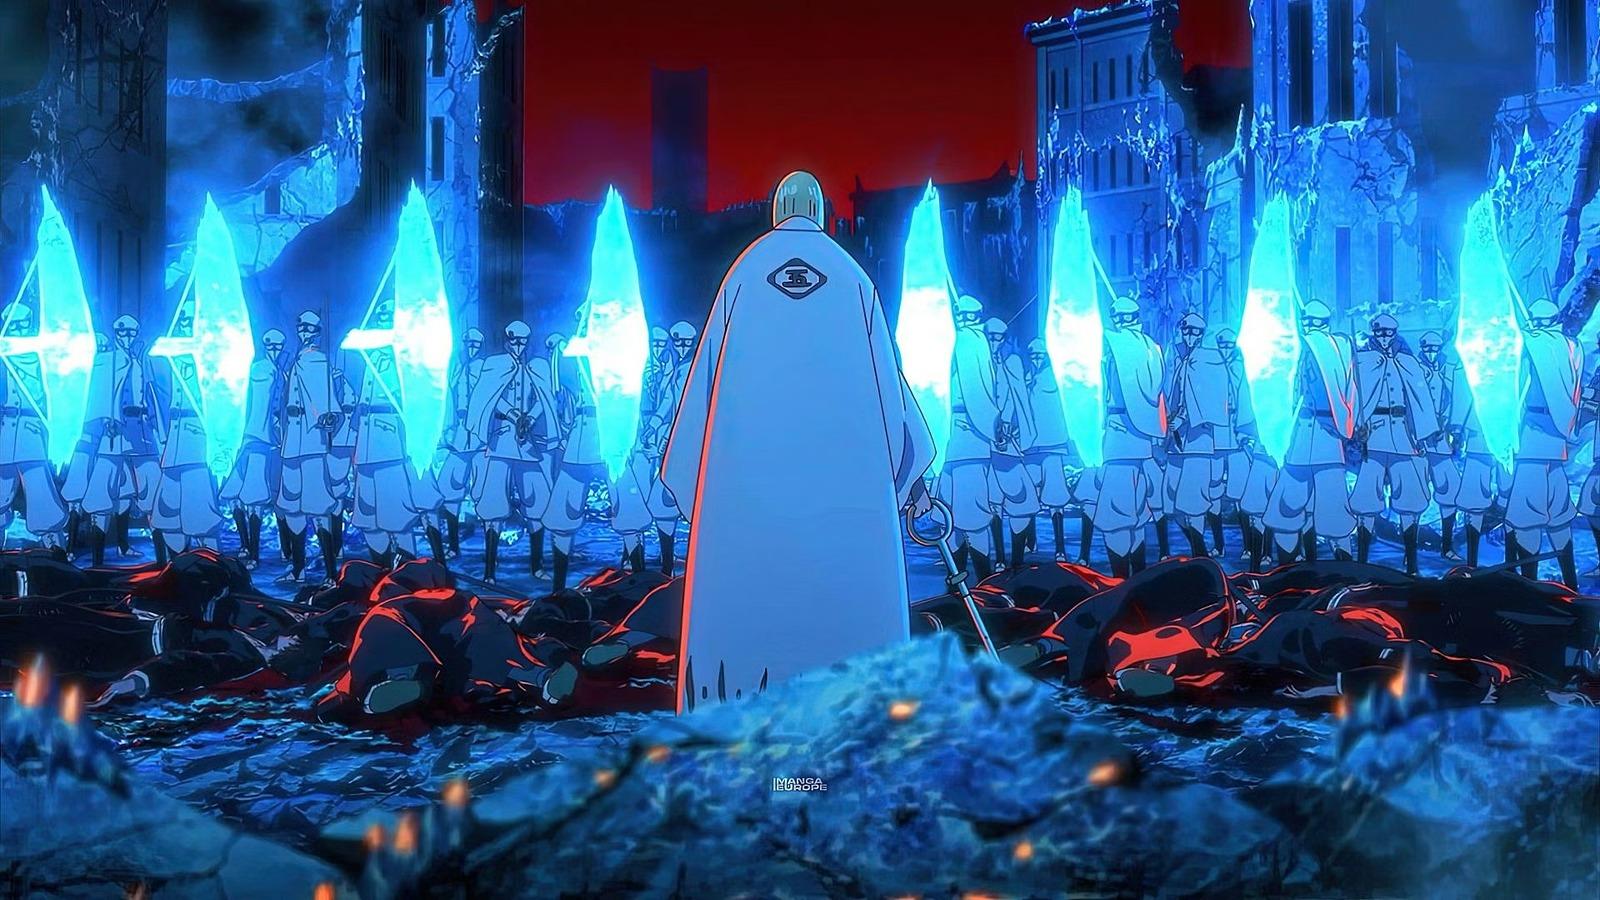 Bleach TYBW Part 2 Episode 2 release date, time: When and where